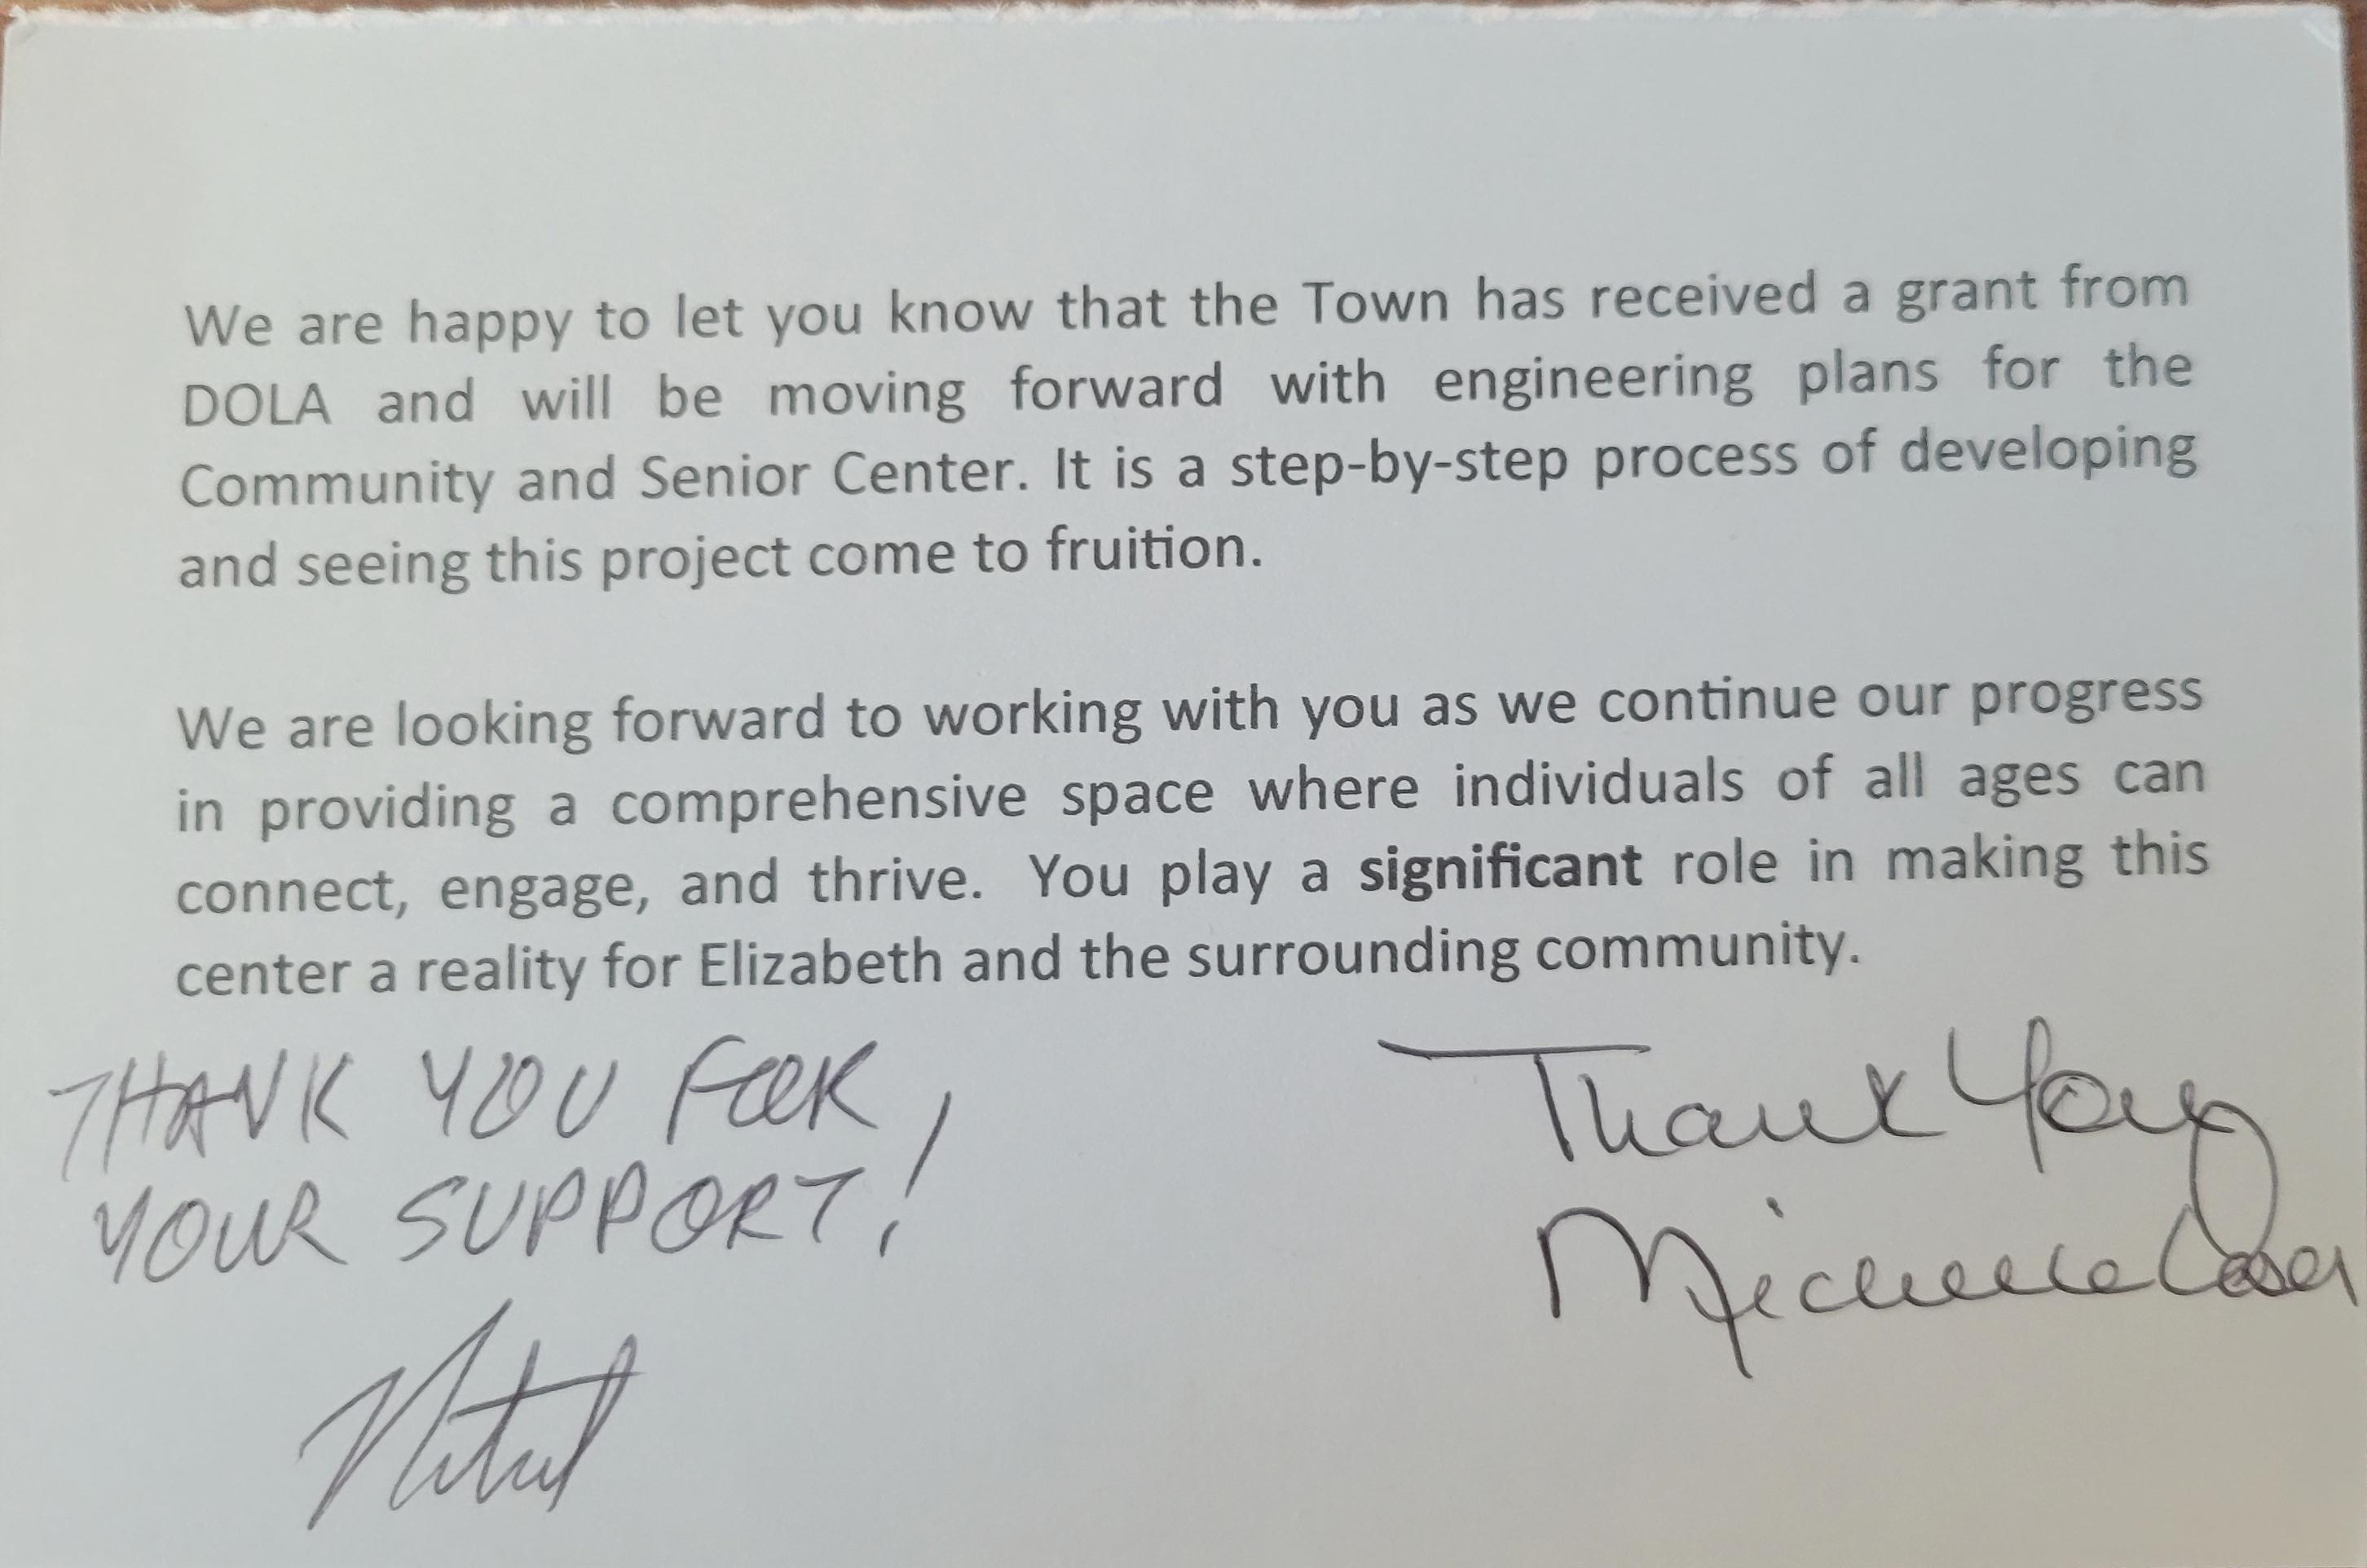 Thank you card from the Town of Elizabeth for support with a DOLA grant